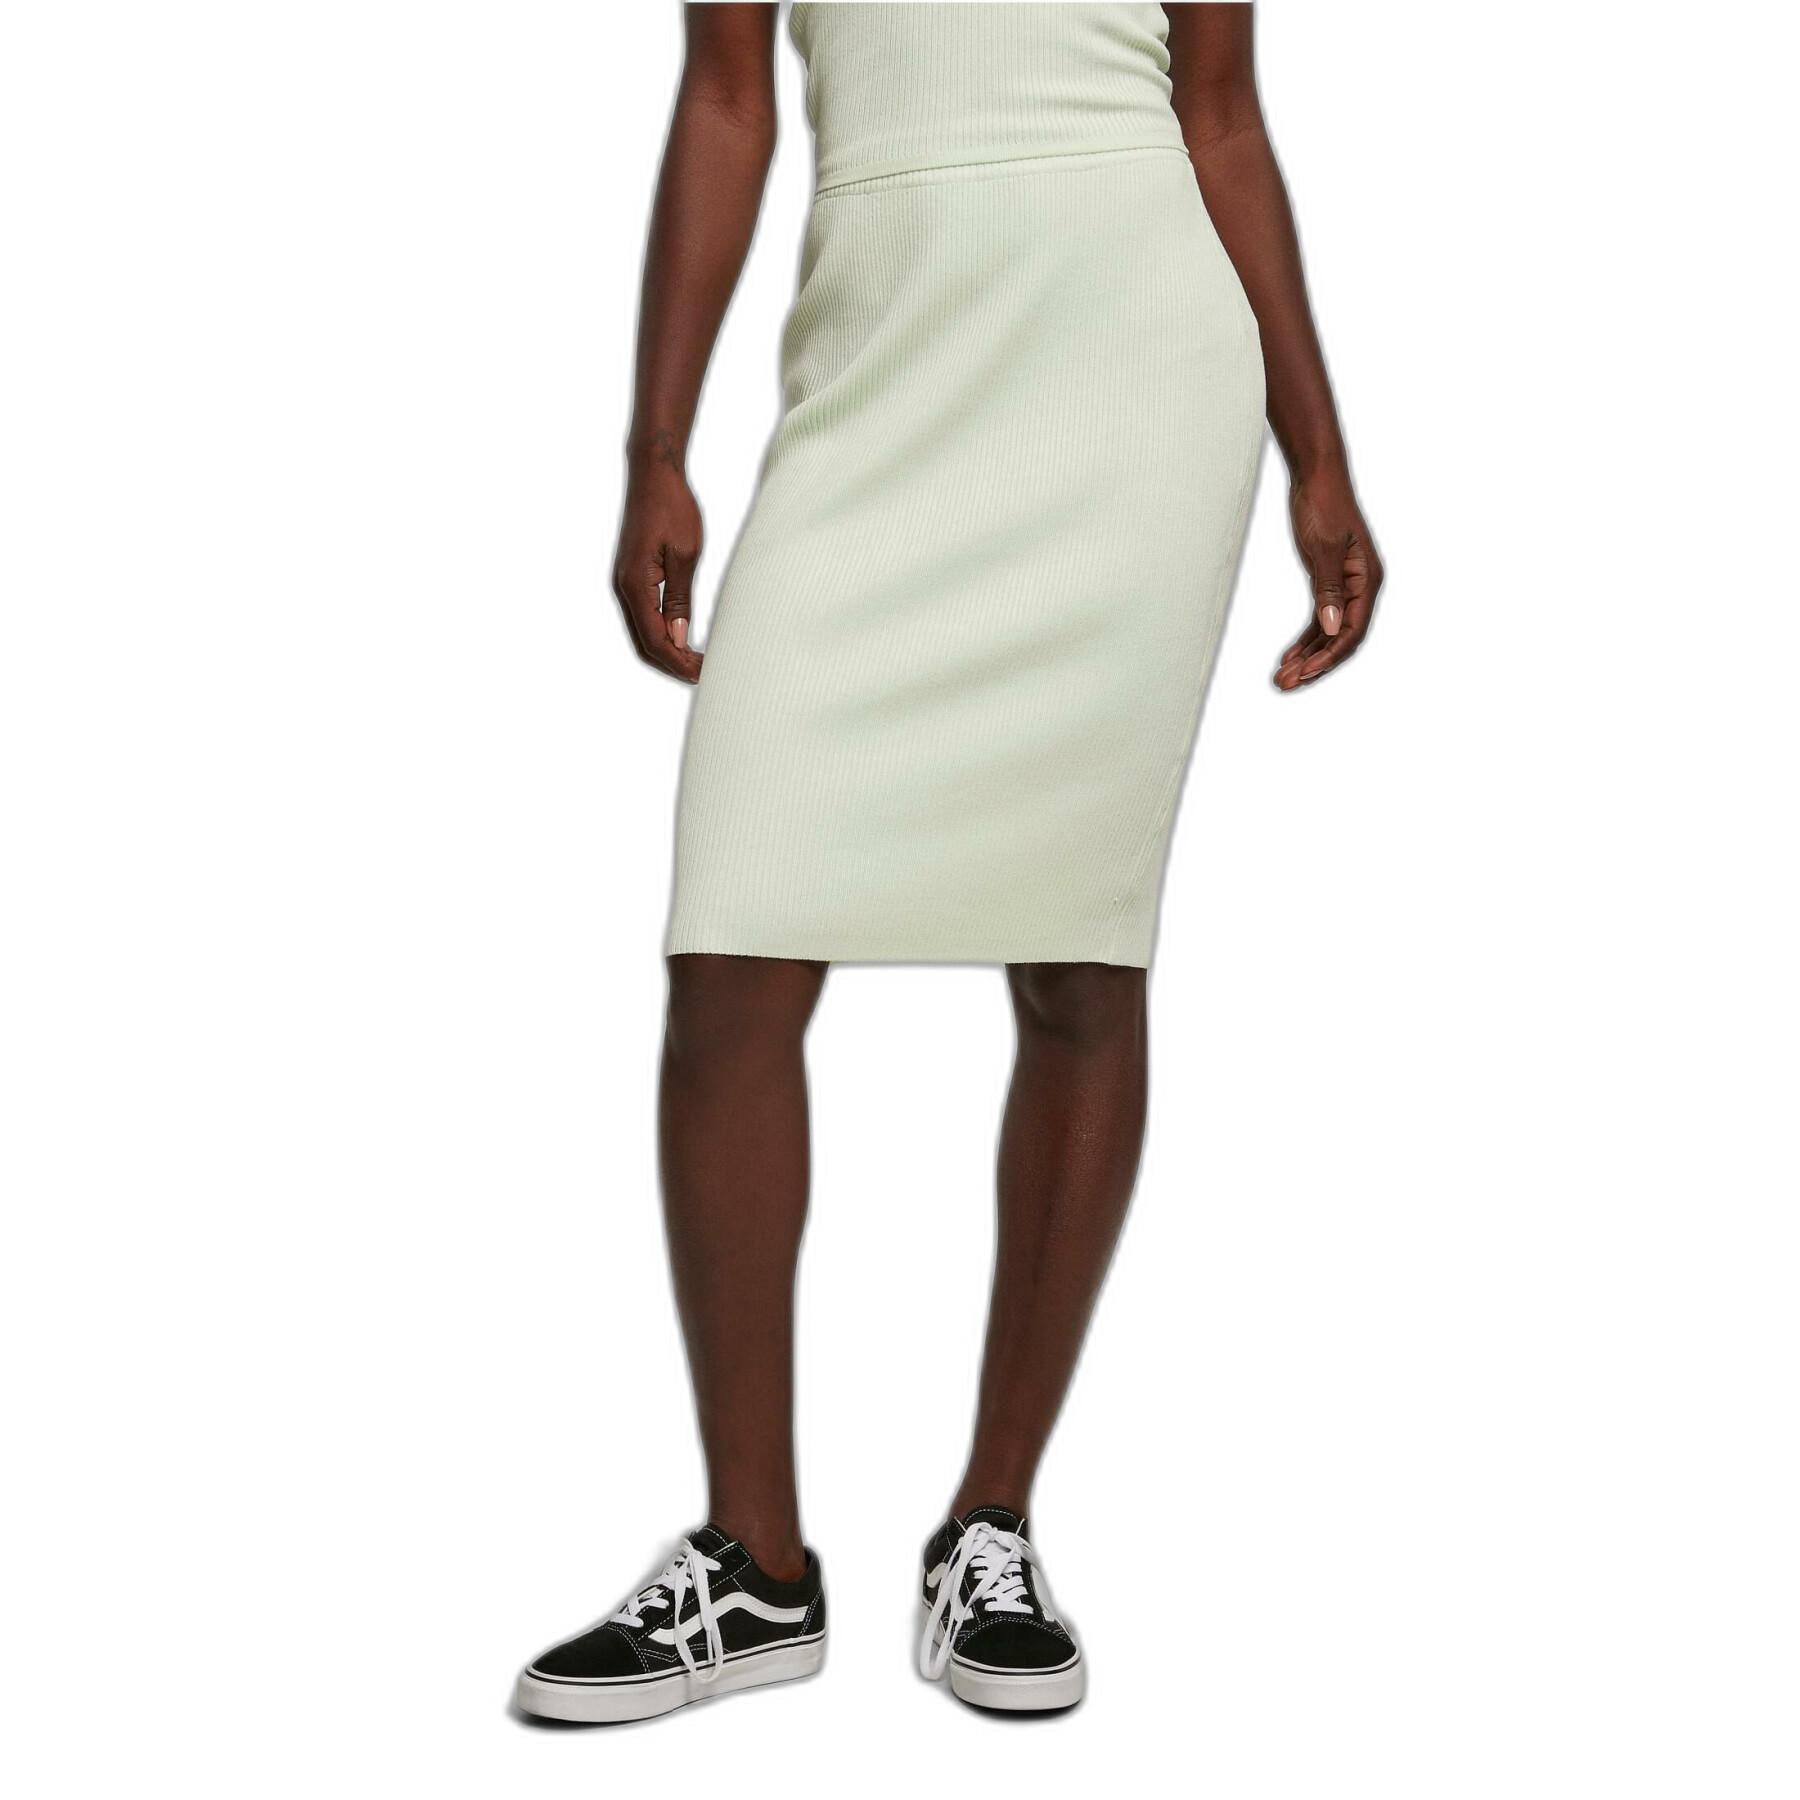 Mid-length skirt in ribbed knit for women Urban Classics